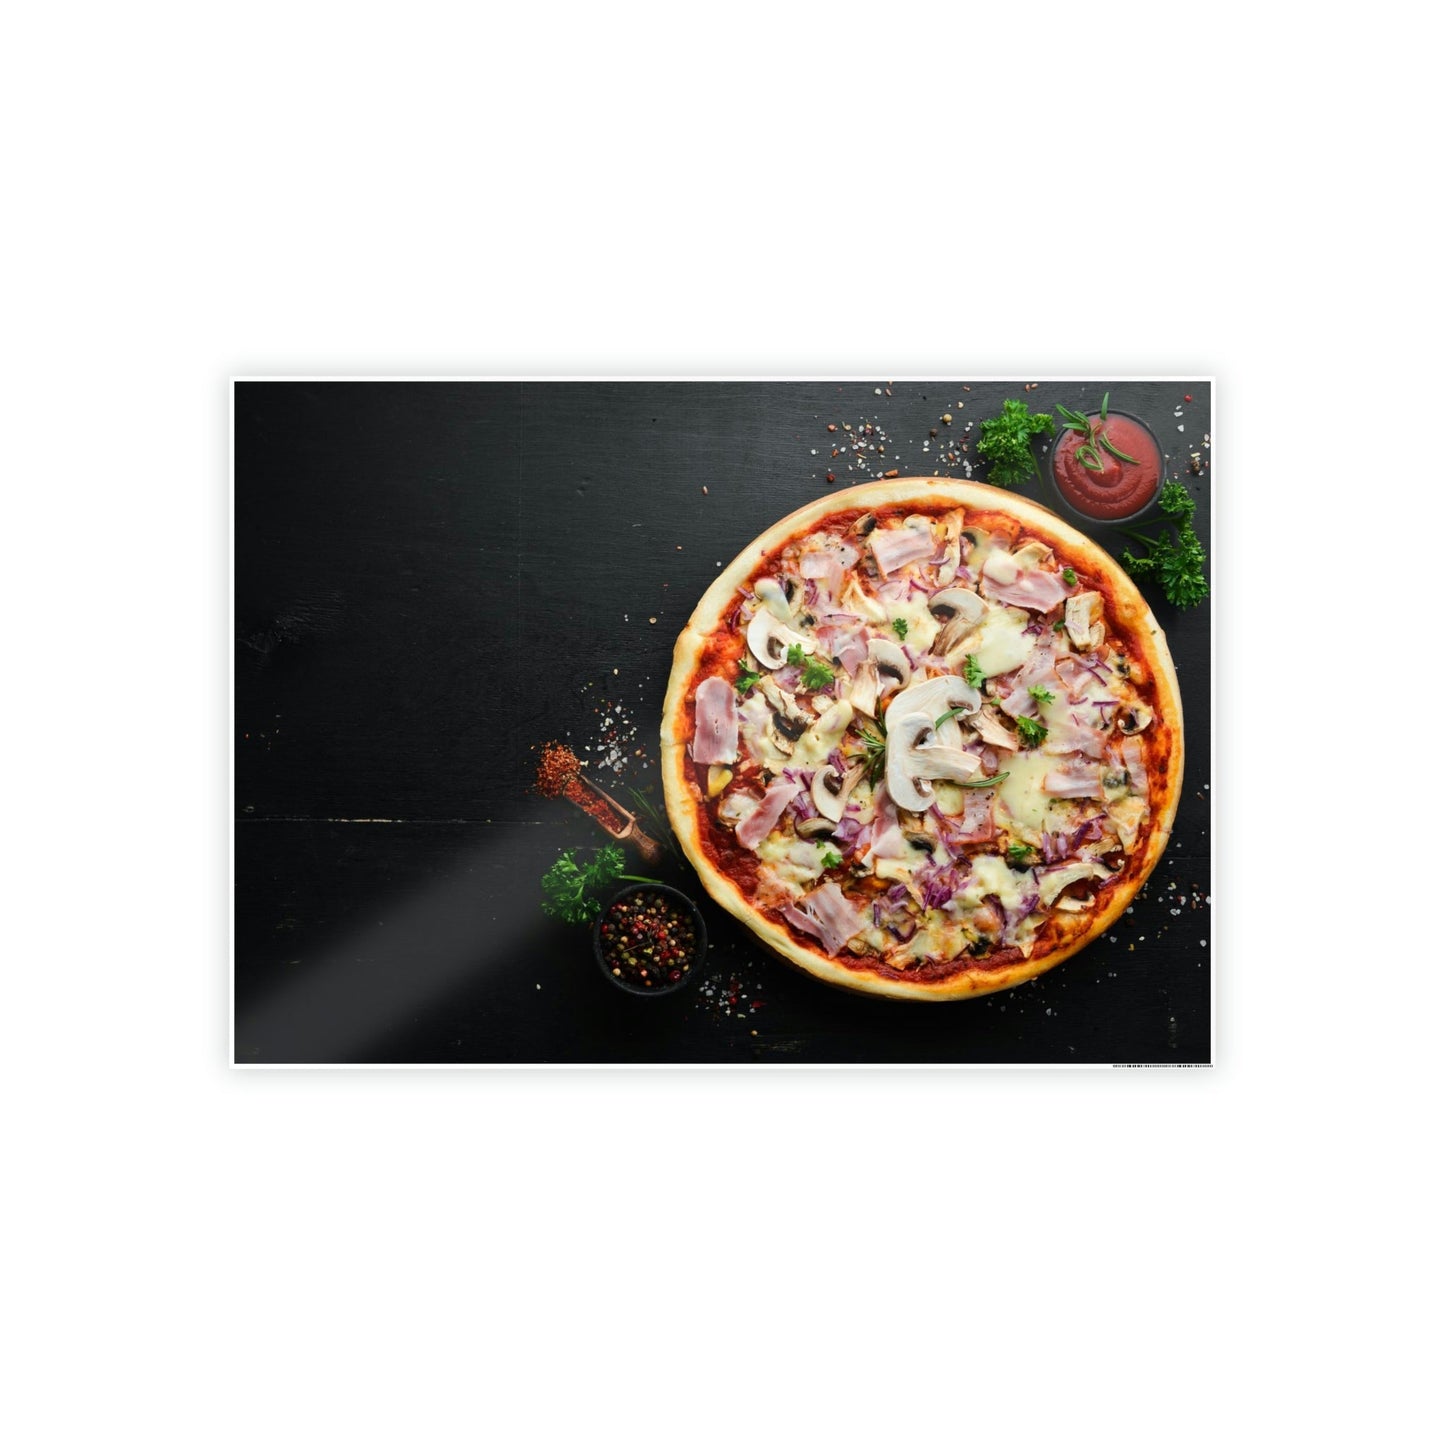 Delicious Delight: Natural Canvas Wall Art of Mouth-Watering Pizza Images for Foodies